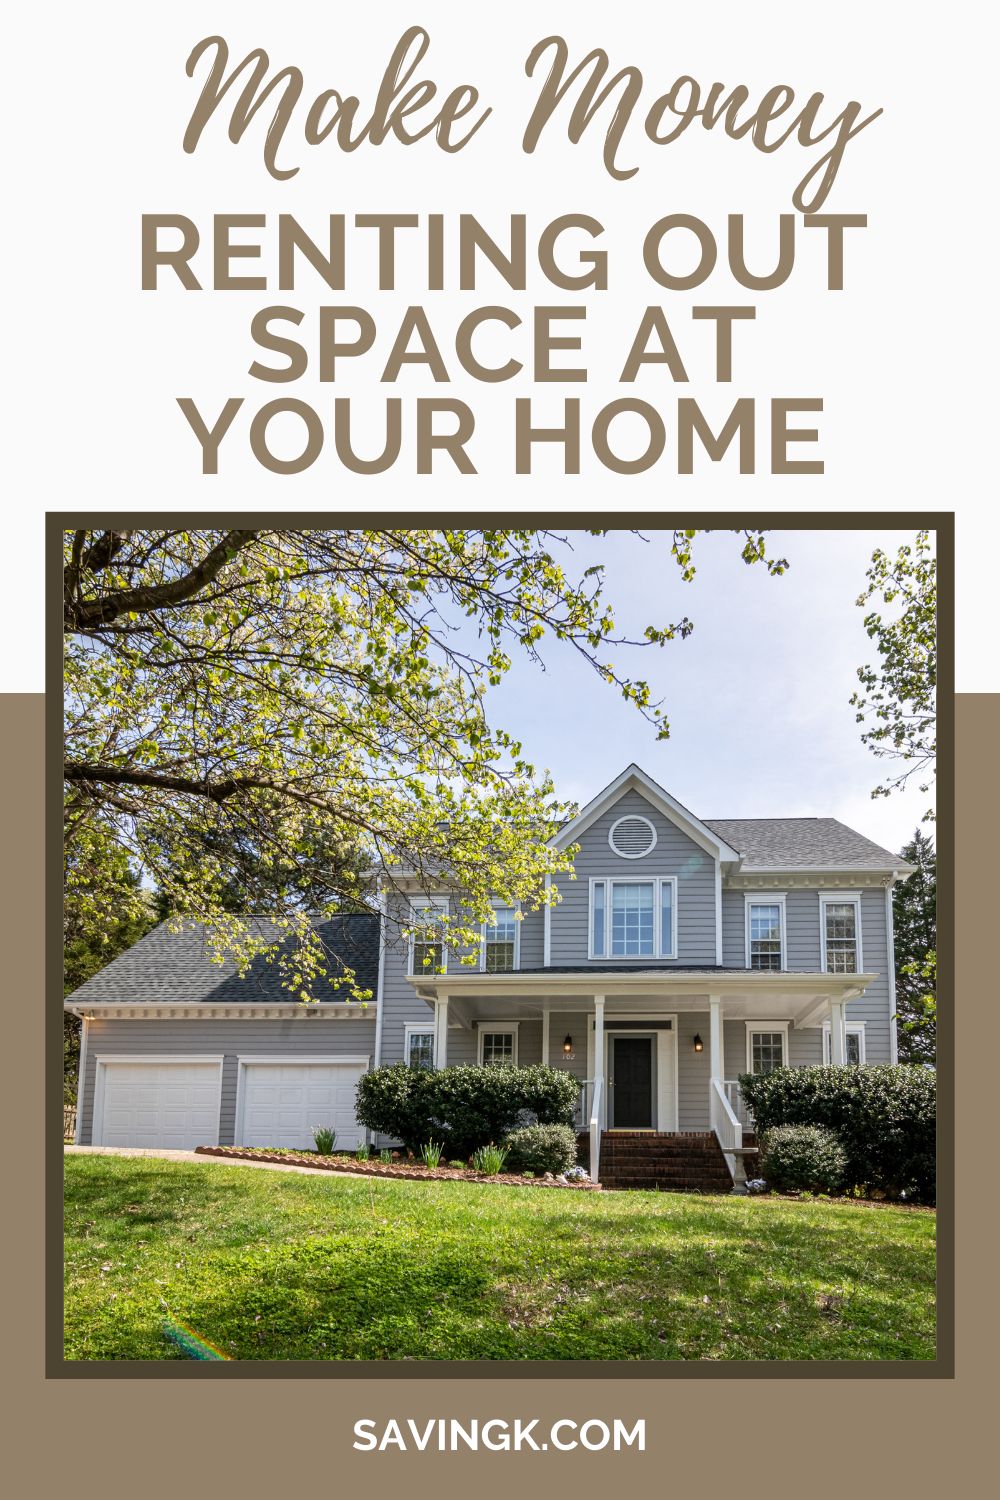 Make Money Renting Out Space At Your Home